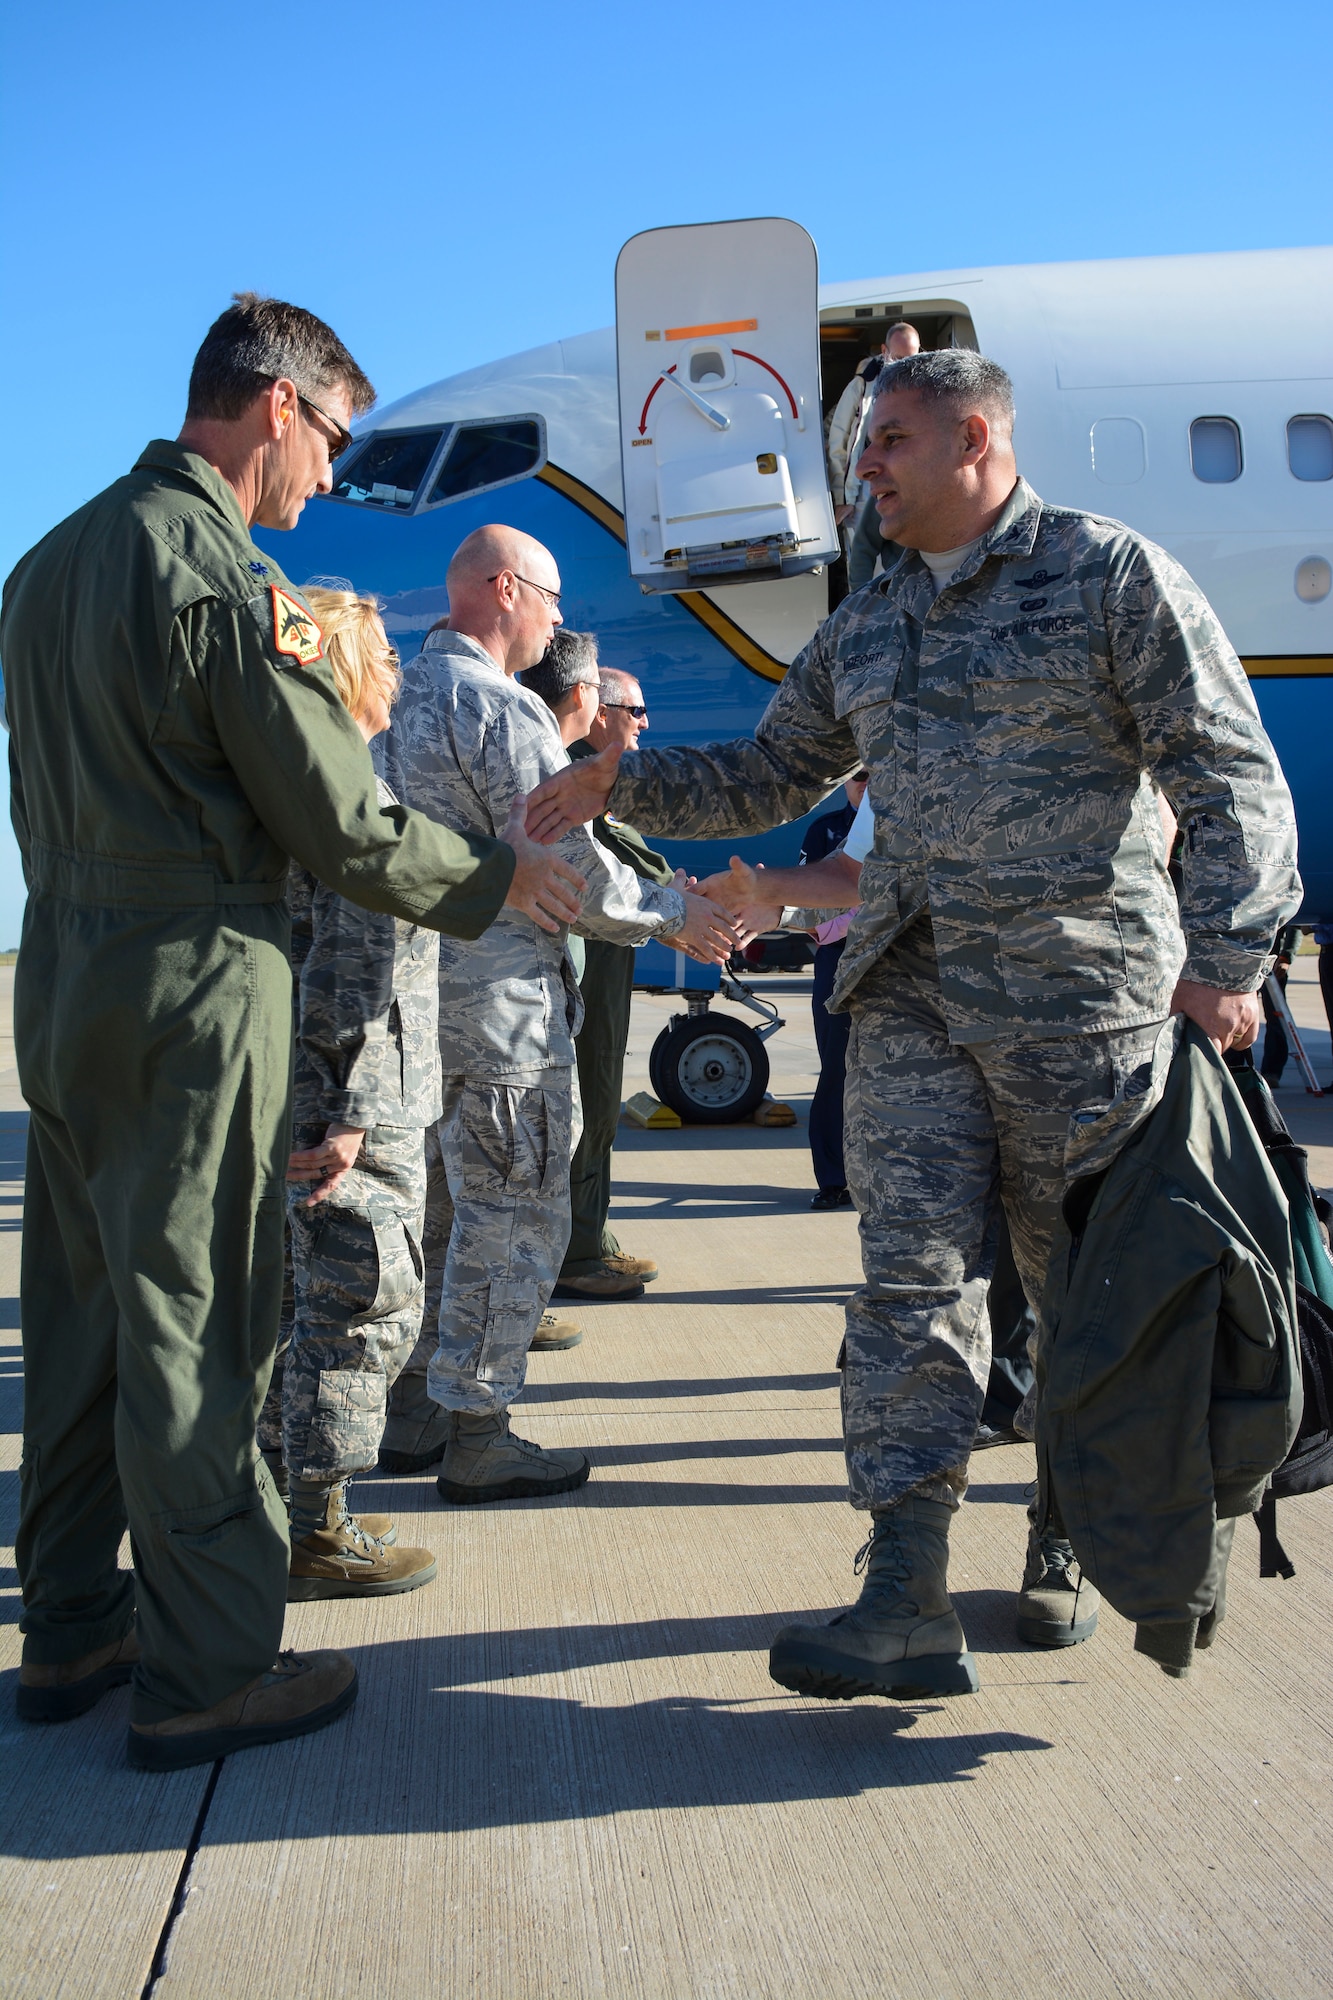 Lt. Col. Ken Humphrey, 465th Air Refueling Squadron Director of Operations along with the 507th Air Refueling Wing leadership greet Col. Michael Loforti, AFRC A3 Chief of Flight Standards and other members of the Air Force Reserve Command Inspector General team here Oct 31.  The 40 person AFRC IG team inspected the 507th Air Refueling Wing Oct. 31 - Nov. 4 for the new unit effectiveness inspection capstone event as part of the new Air Force Inspection System.  The 507th received an overall "effective" rating by the IG.  (U. S. Air Force Photo/Senior Airman Mark Hybers)  
